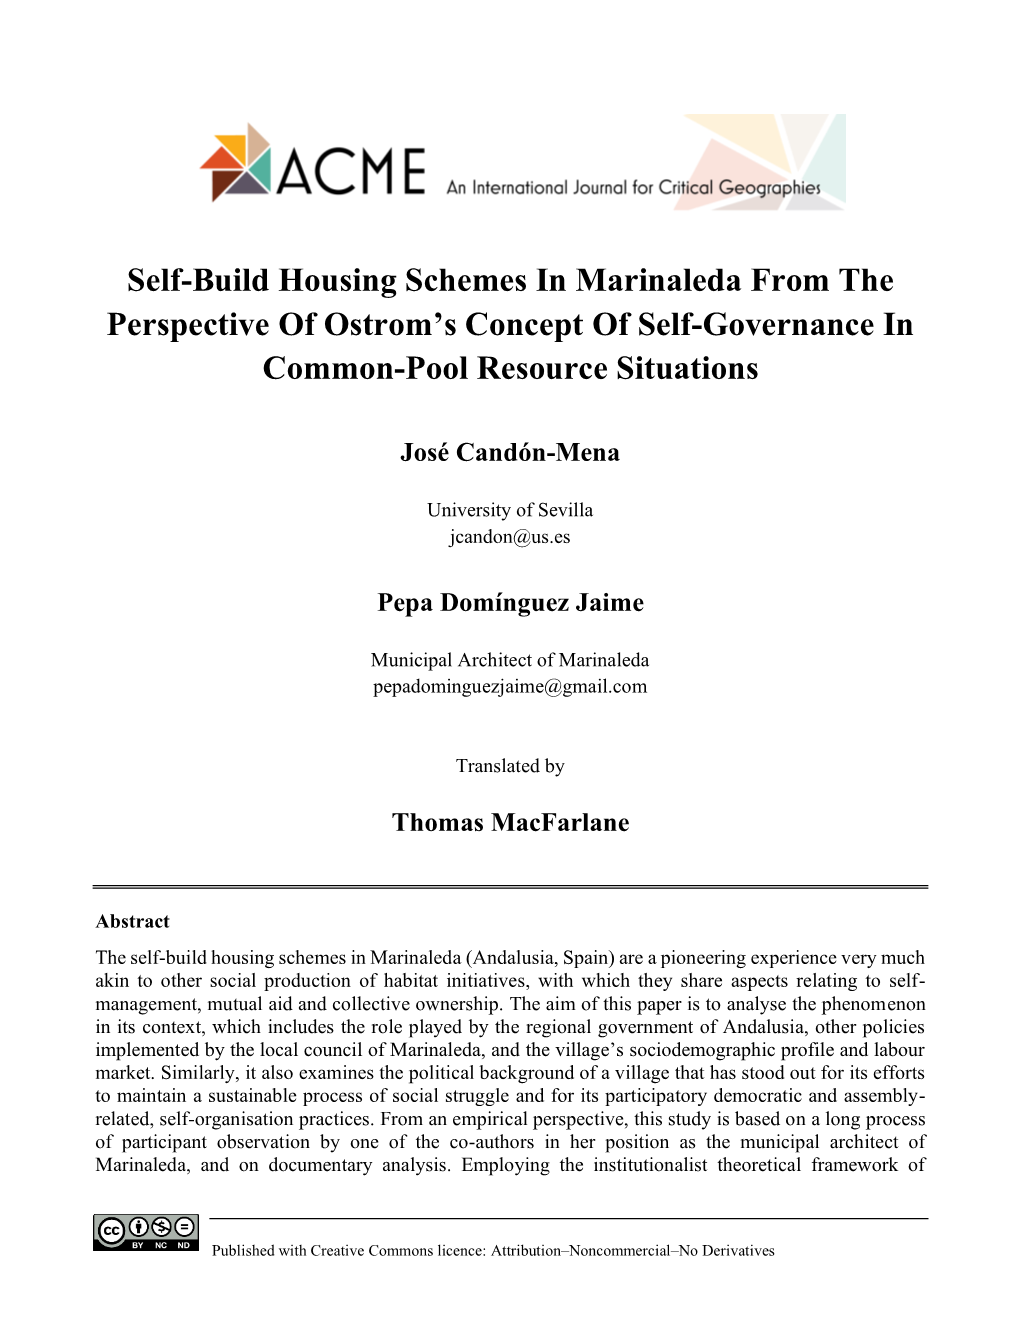 Self-Build Housing Schemes in Marinaleda from the Perspective of Ostrom's Concept of Self-Governance in Common-Pool Resource S